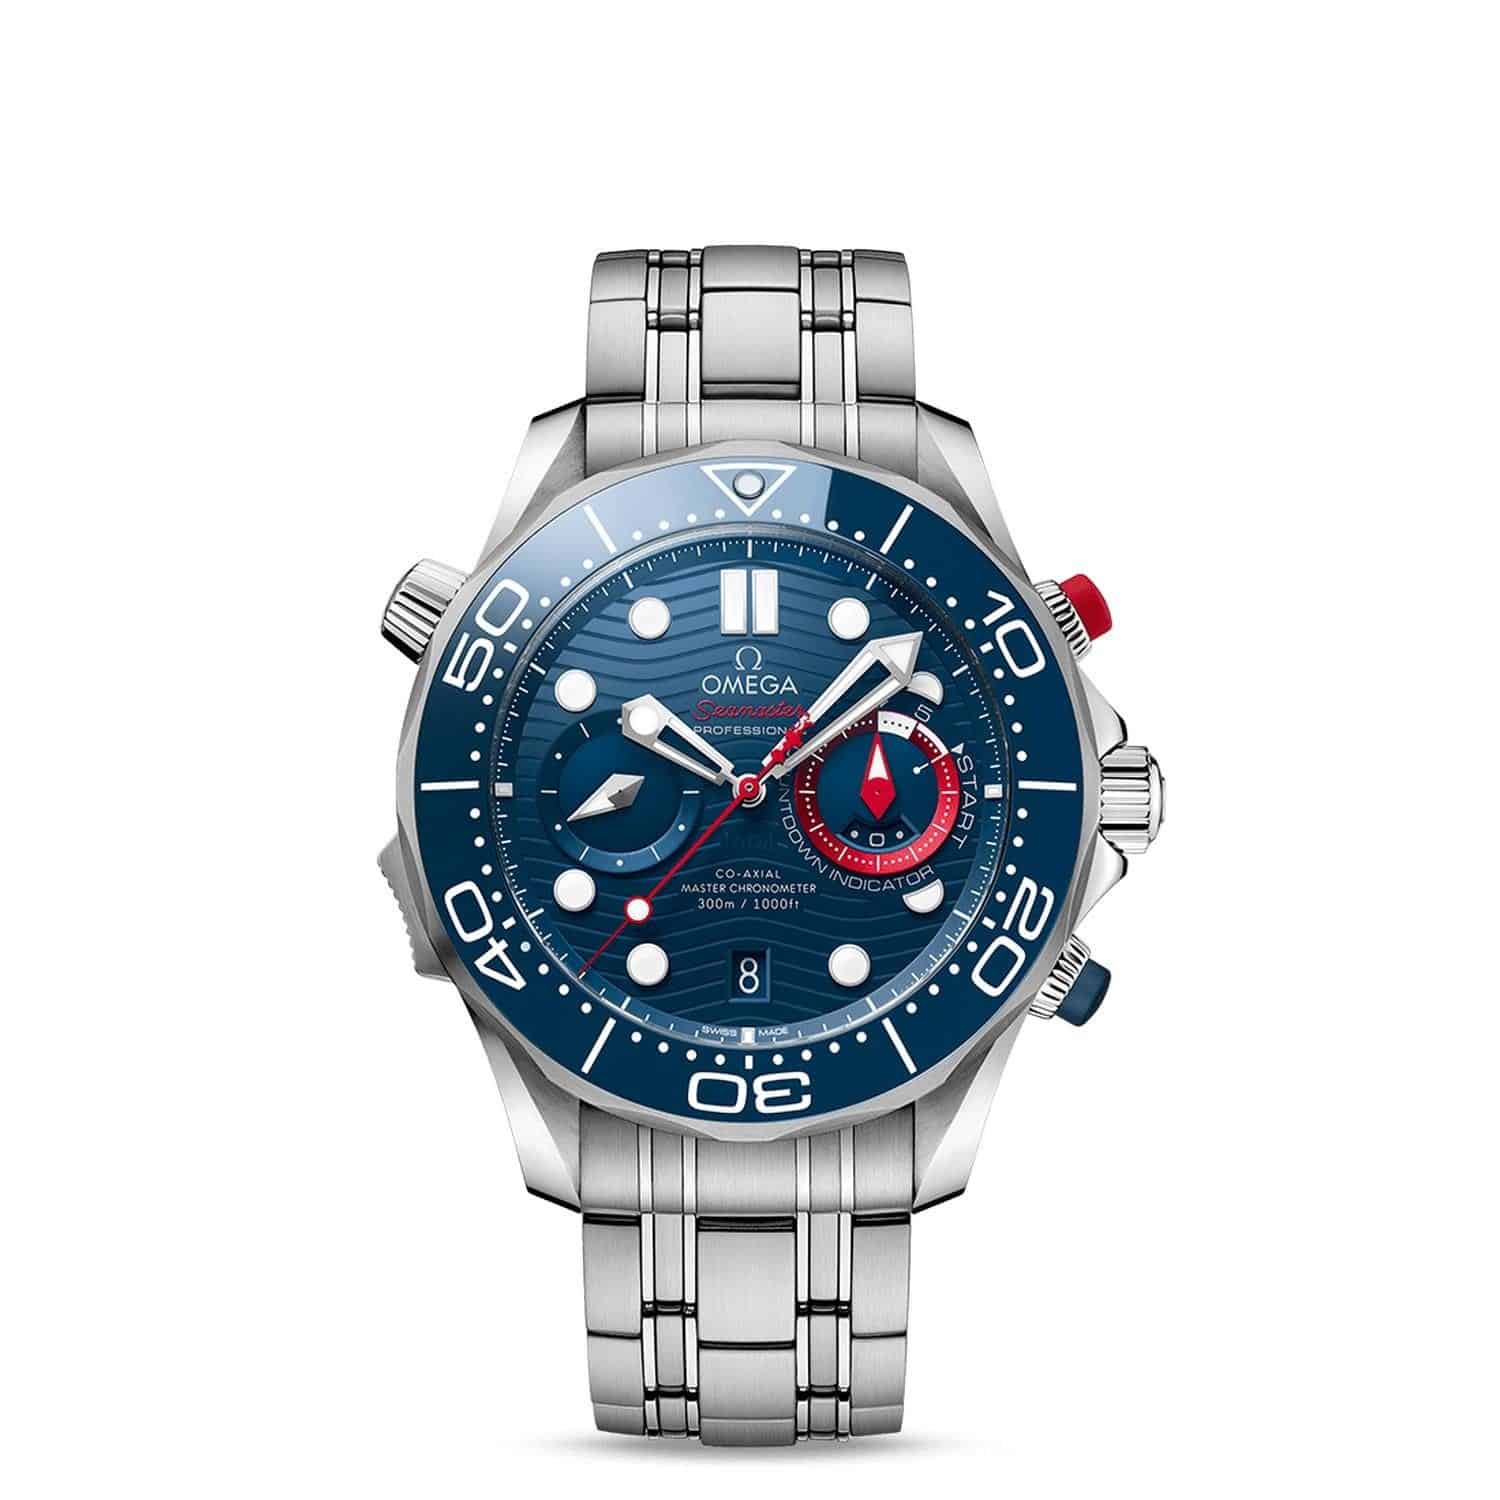 OMEGA DIVER 300M CHRONOGRAPH - AMERICA´S CUP 44 MM - O21030445103002